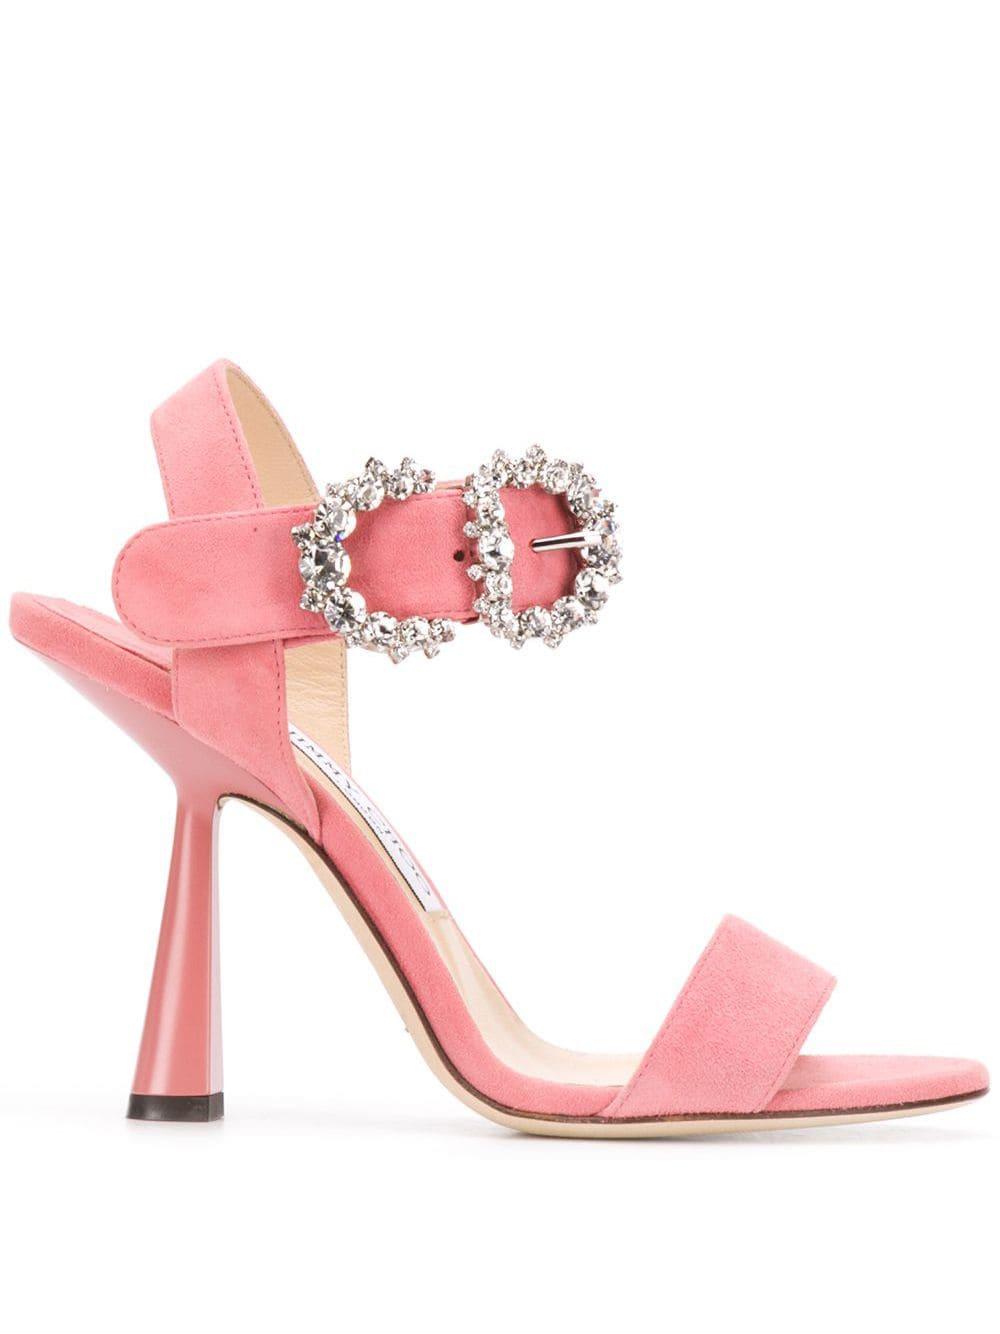 Jimmy Choo Suede Sereno 100 Sandals in Pink - Lyst